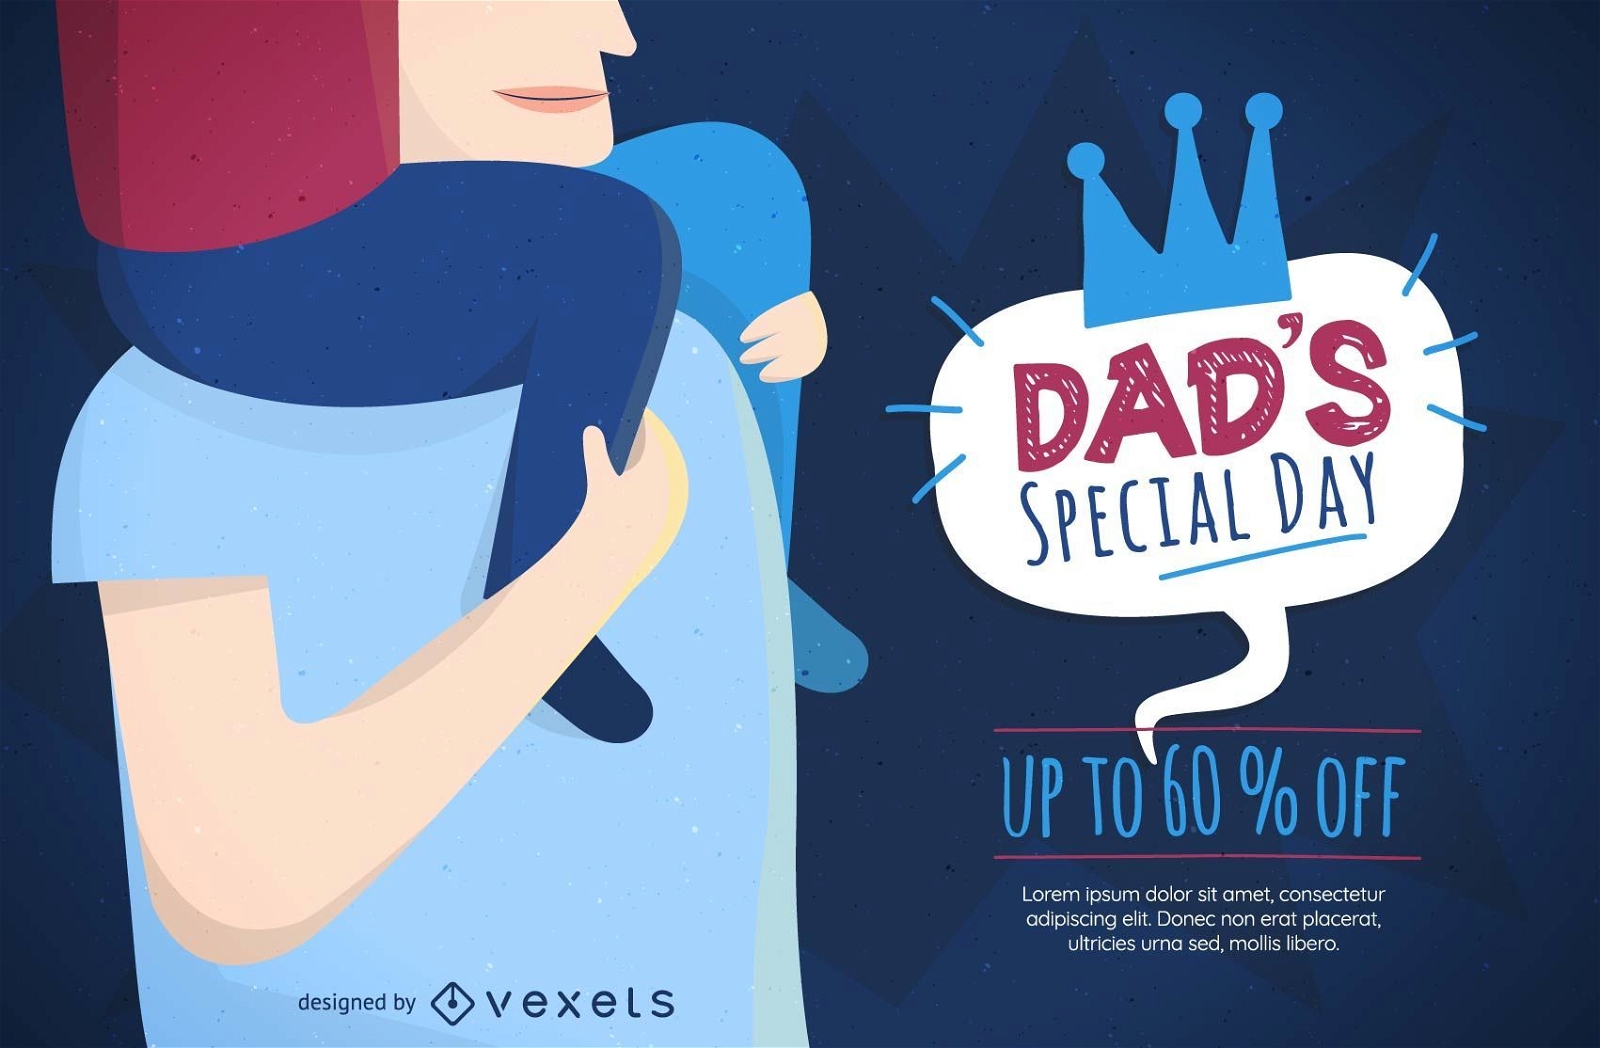 Dad special day banner